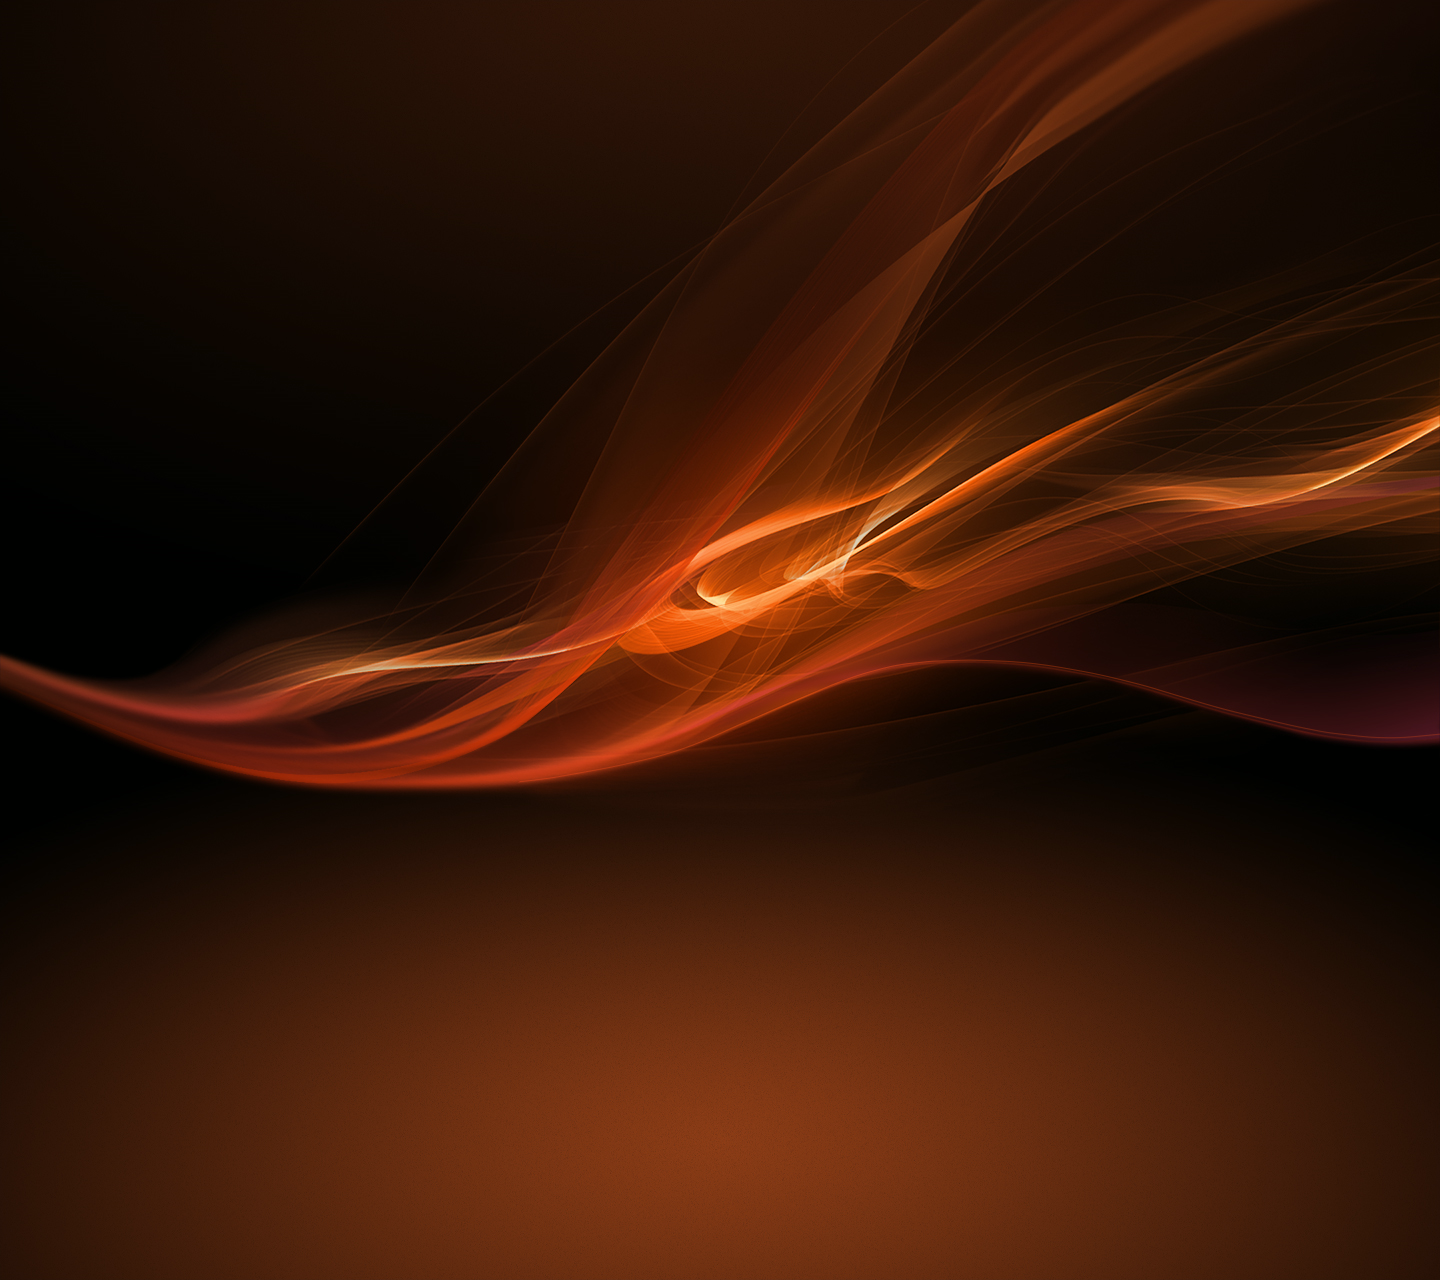 HD Wallpapers - Android, IOS, Windows Phone and Desktop